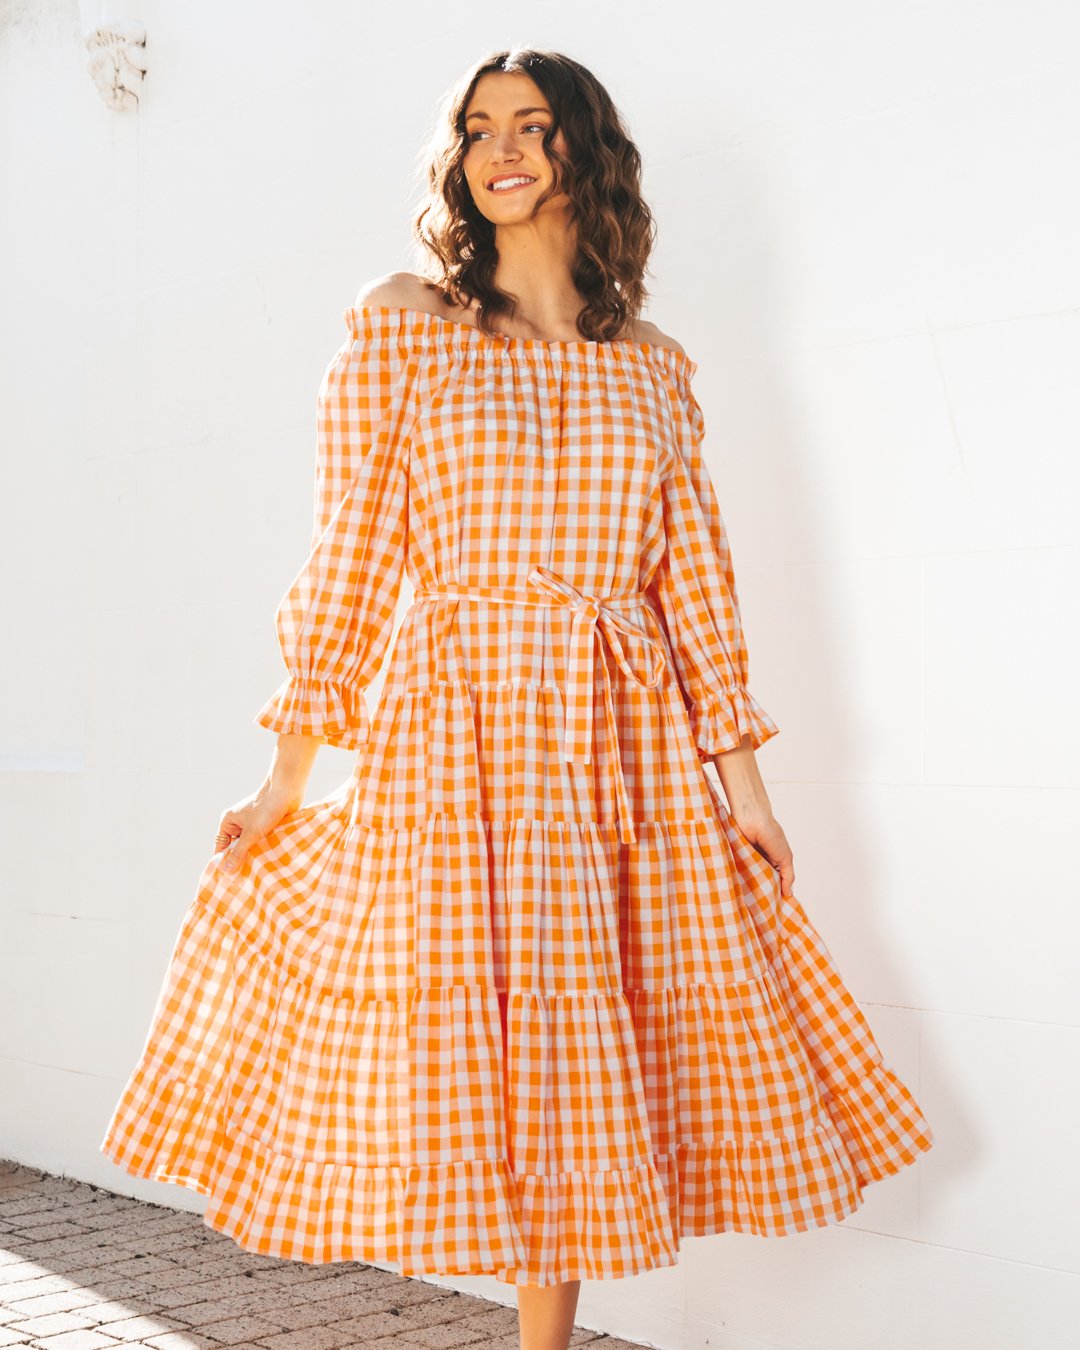 Label Of Love - Gingham Dress - Brands-Label Of Love : Mhor - White ...